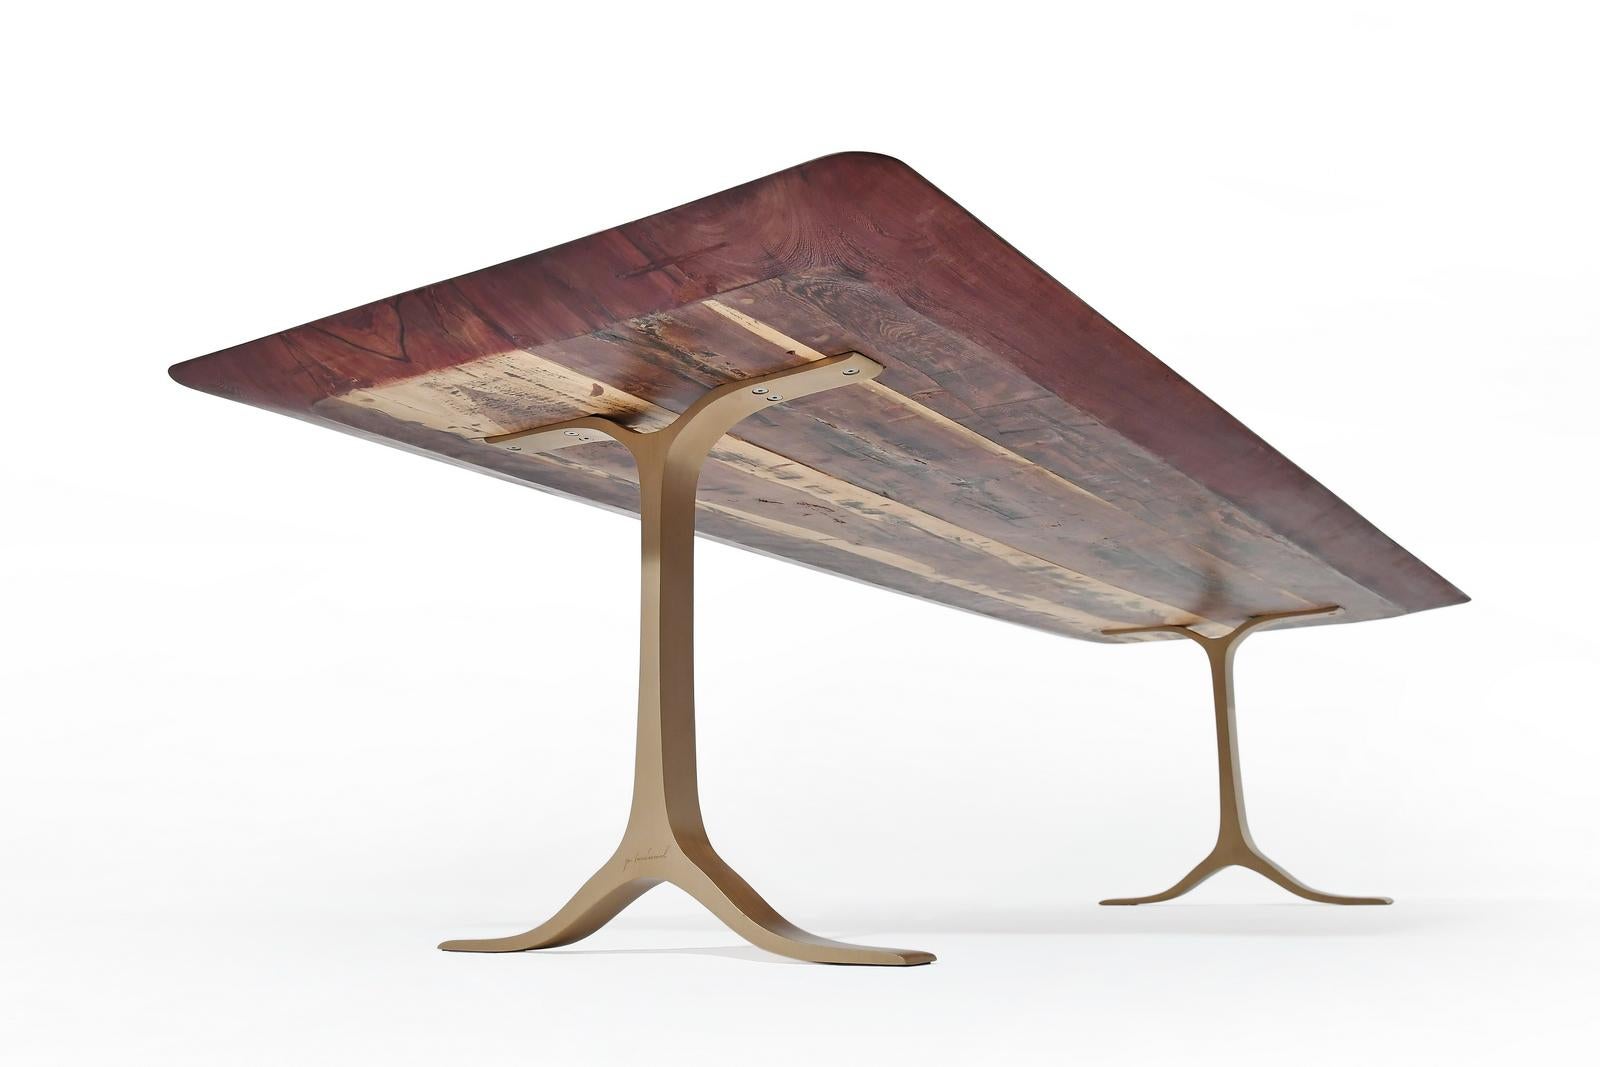 Bronze Bespoke Dining Table, Reclaimed Wood, Sand Cast Brass Base, by P. Tendercool For Sale